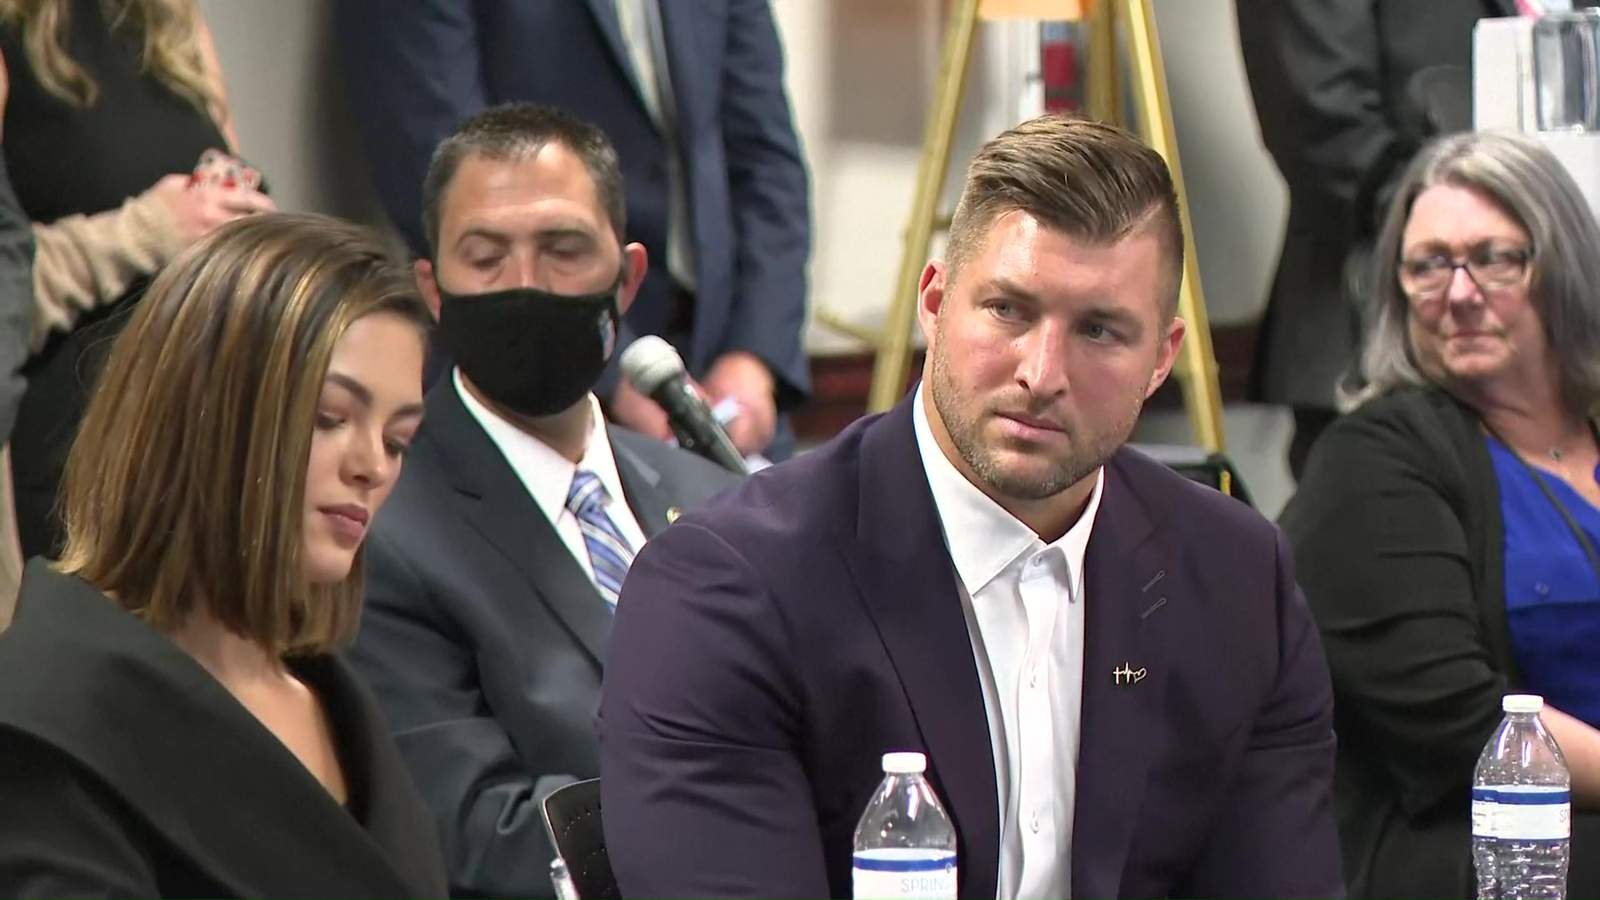 Tim Tebow joins Barr, Ivanka Trump, working to ‘push back this evil’ that is human trafficking